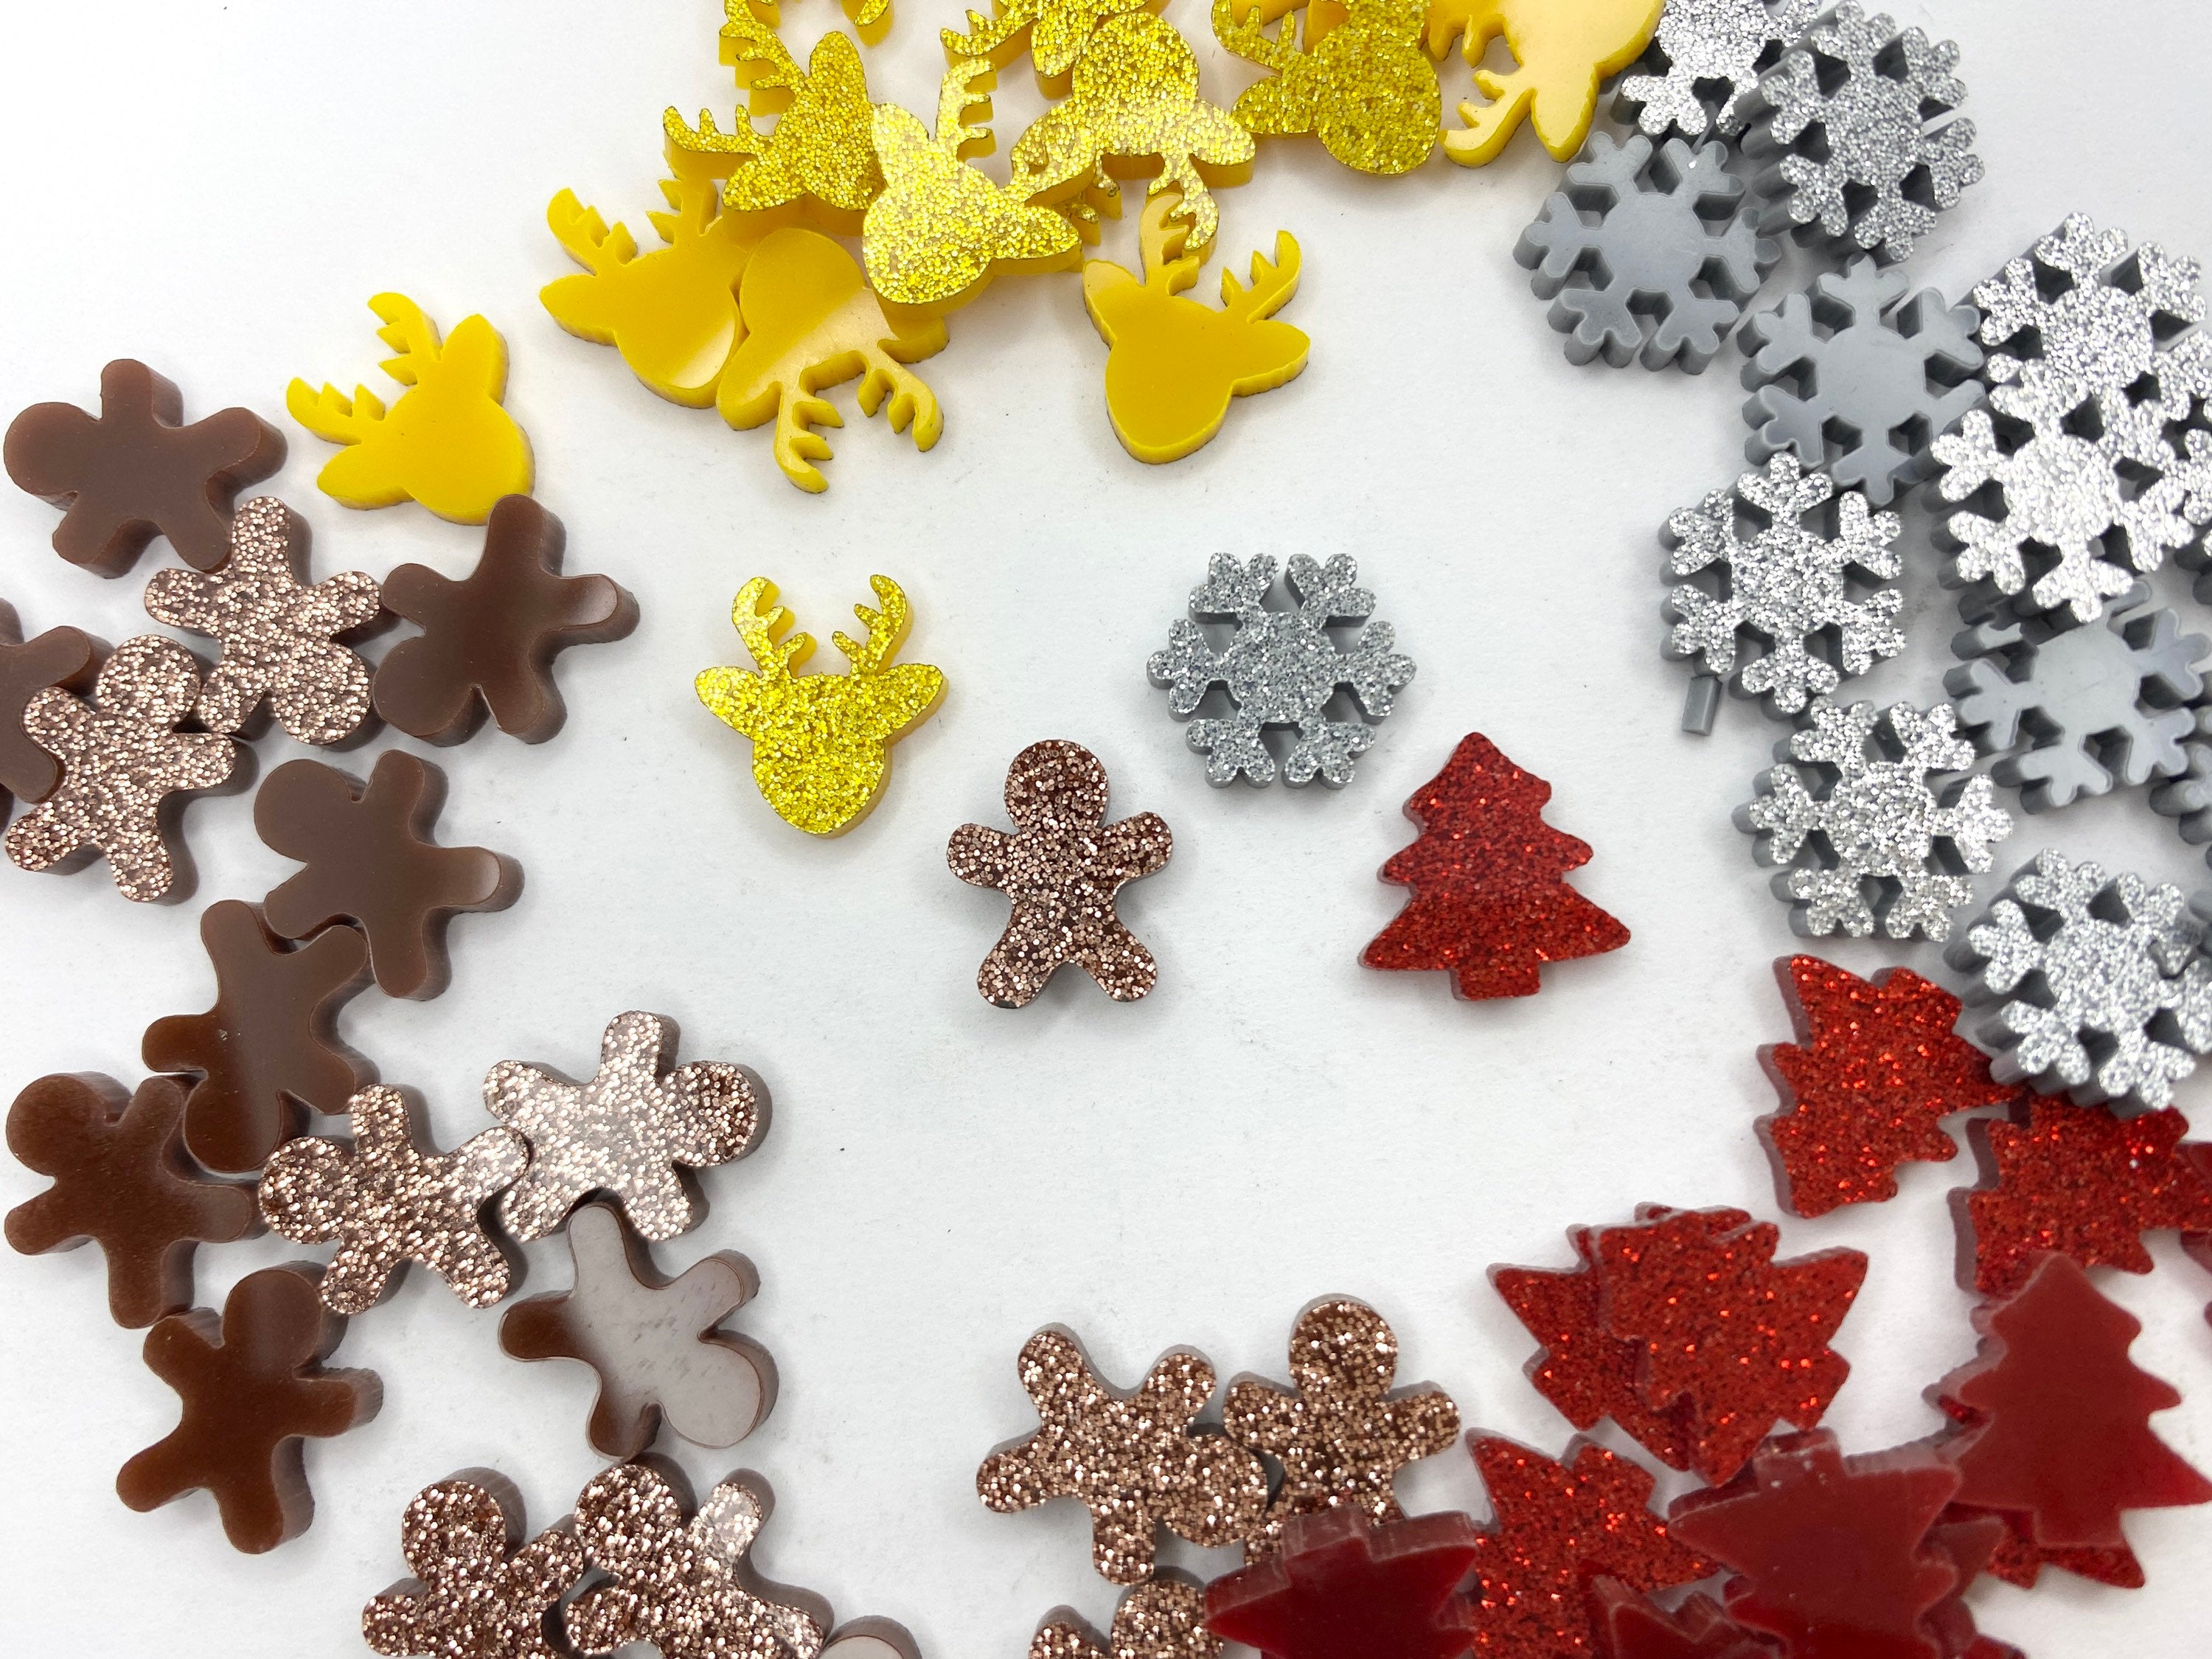 10 pcs,  Approx 12-14mm mixed Die Cut Glittered Christmas Acrylic Deer Gingerbread Man Snowflakes